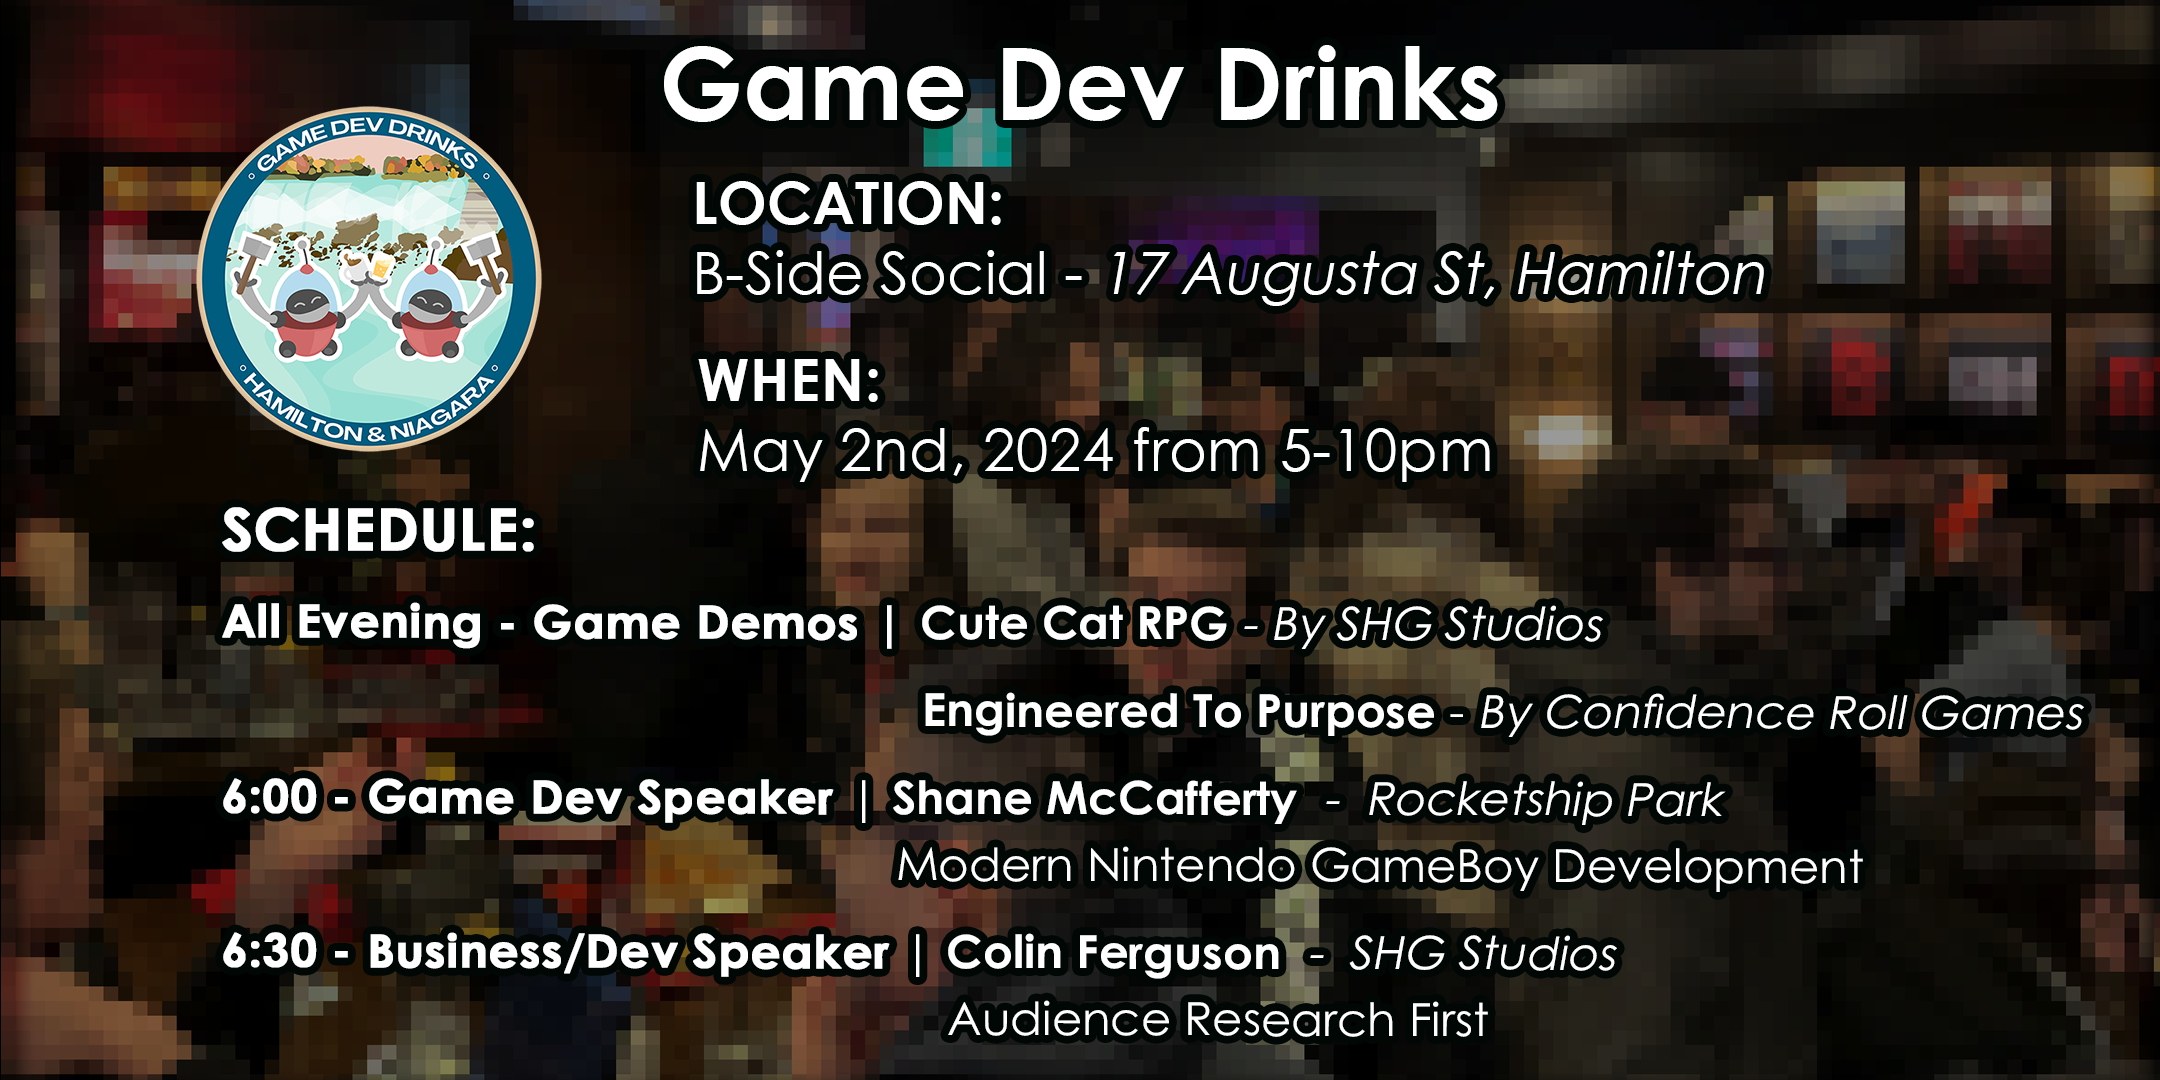 Game Dev Drinks Hamilton & Niagara May 2 2024 event announcement image. The location: B-Side Social 17 Augusta St, Hamilton. Time: 5:00pm to 10:00pm. Event schedule: Doors open at 5:00pm.6 to 6:30pm. Guest Speaker - Shane McCafferty from Rocketship Park, Modern Nintendo Game Boy Development. 6:30 to 7pm Colin Ferguson from SHG Studios - Audience Research First